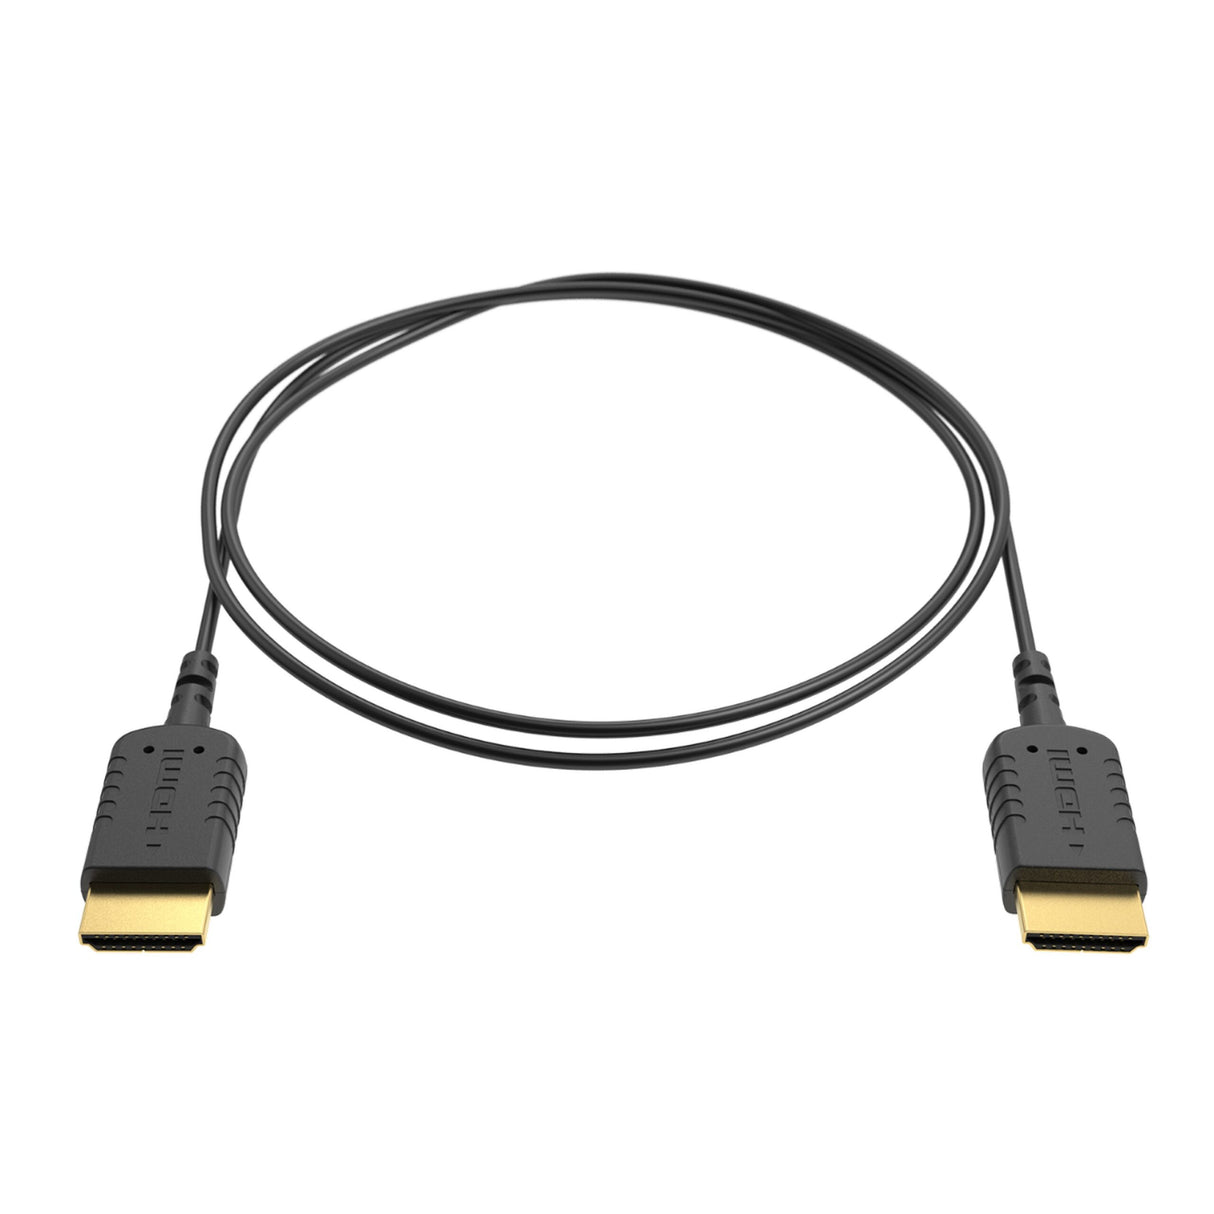 8Sinn eXtraThin HDMI to HDMI Cable, 80 Centimeters